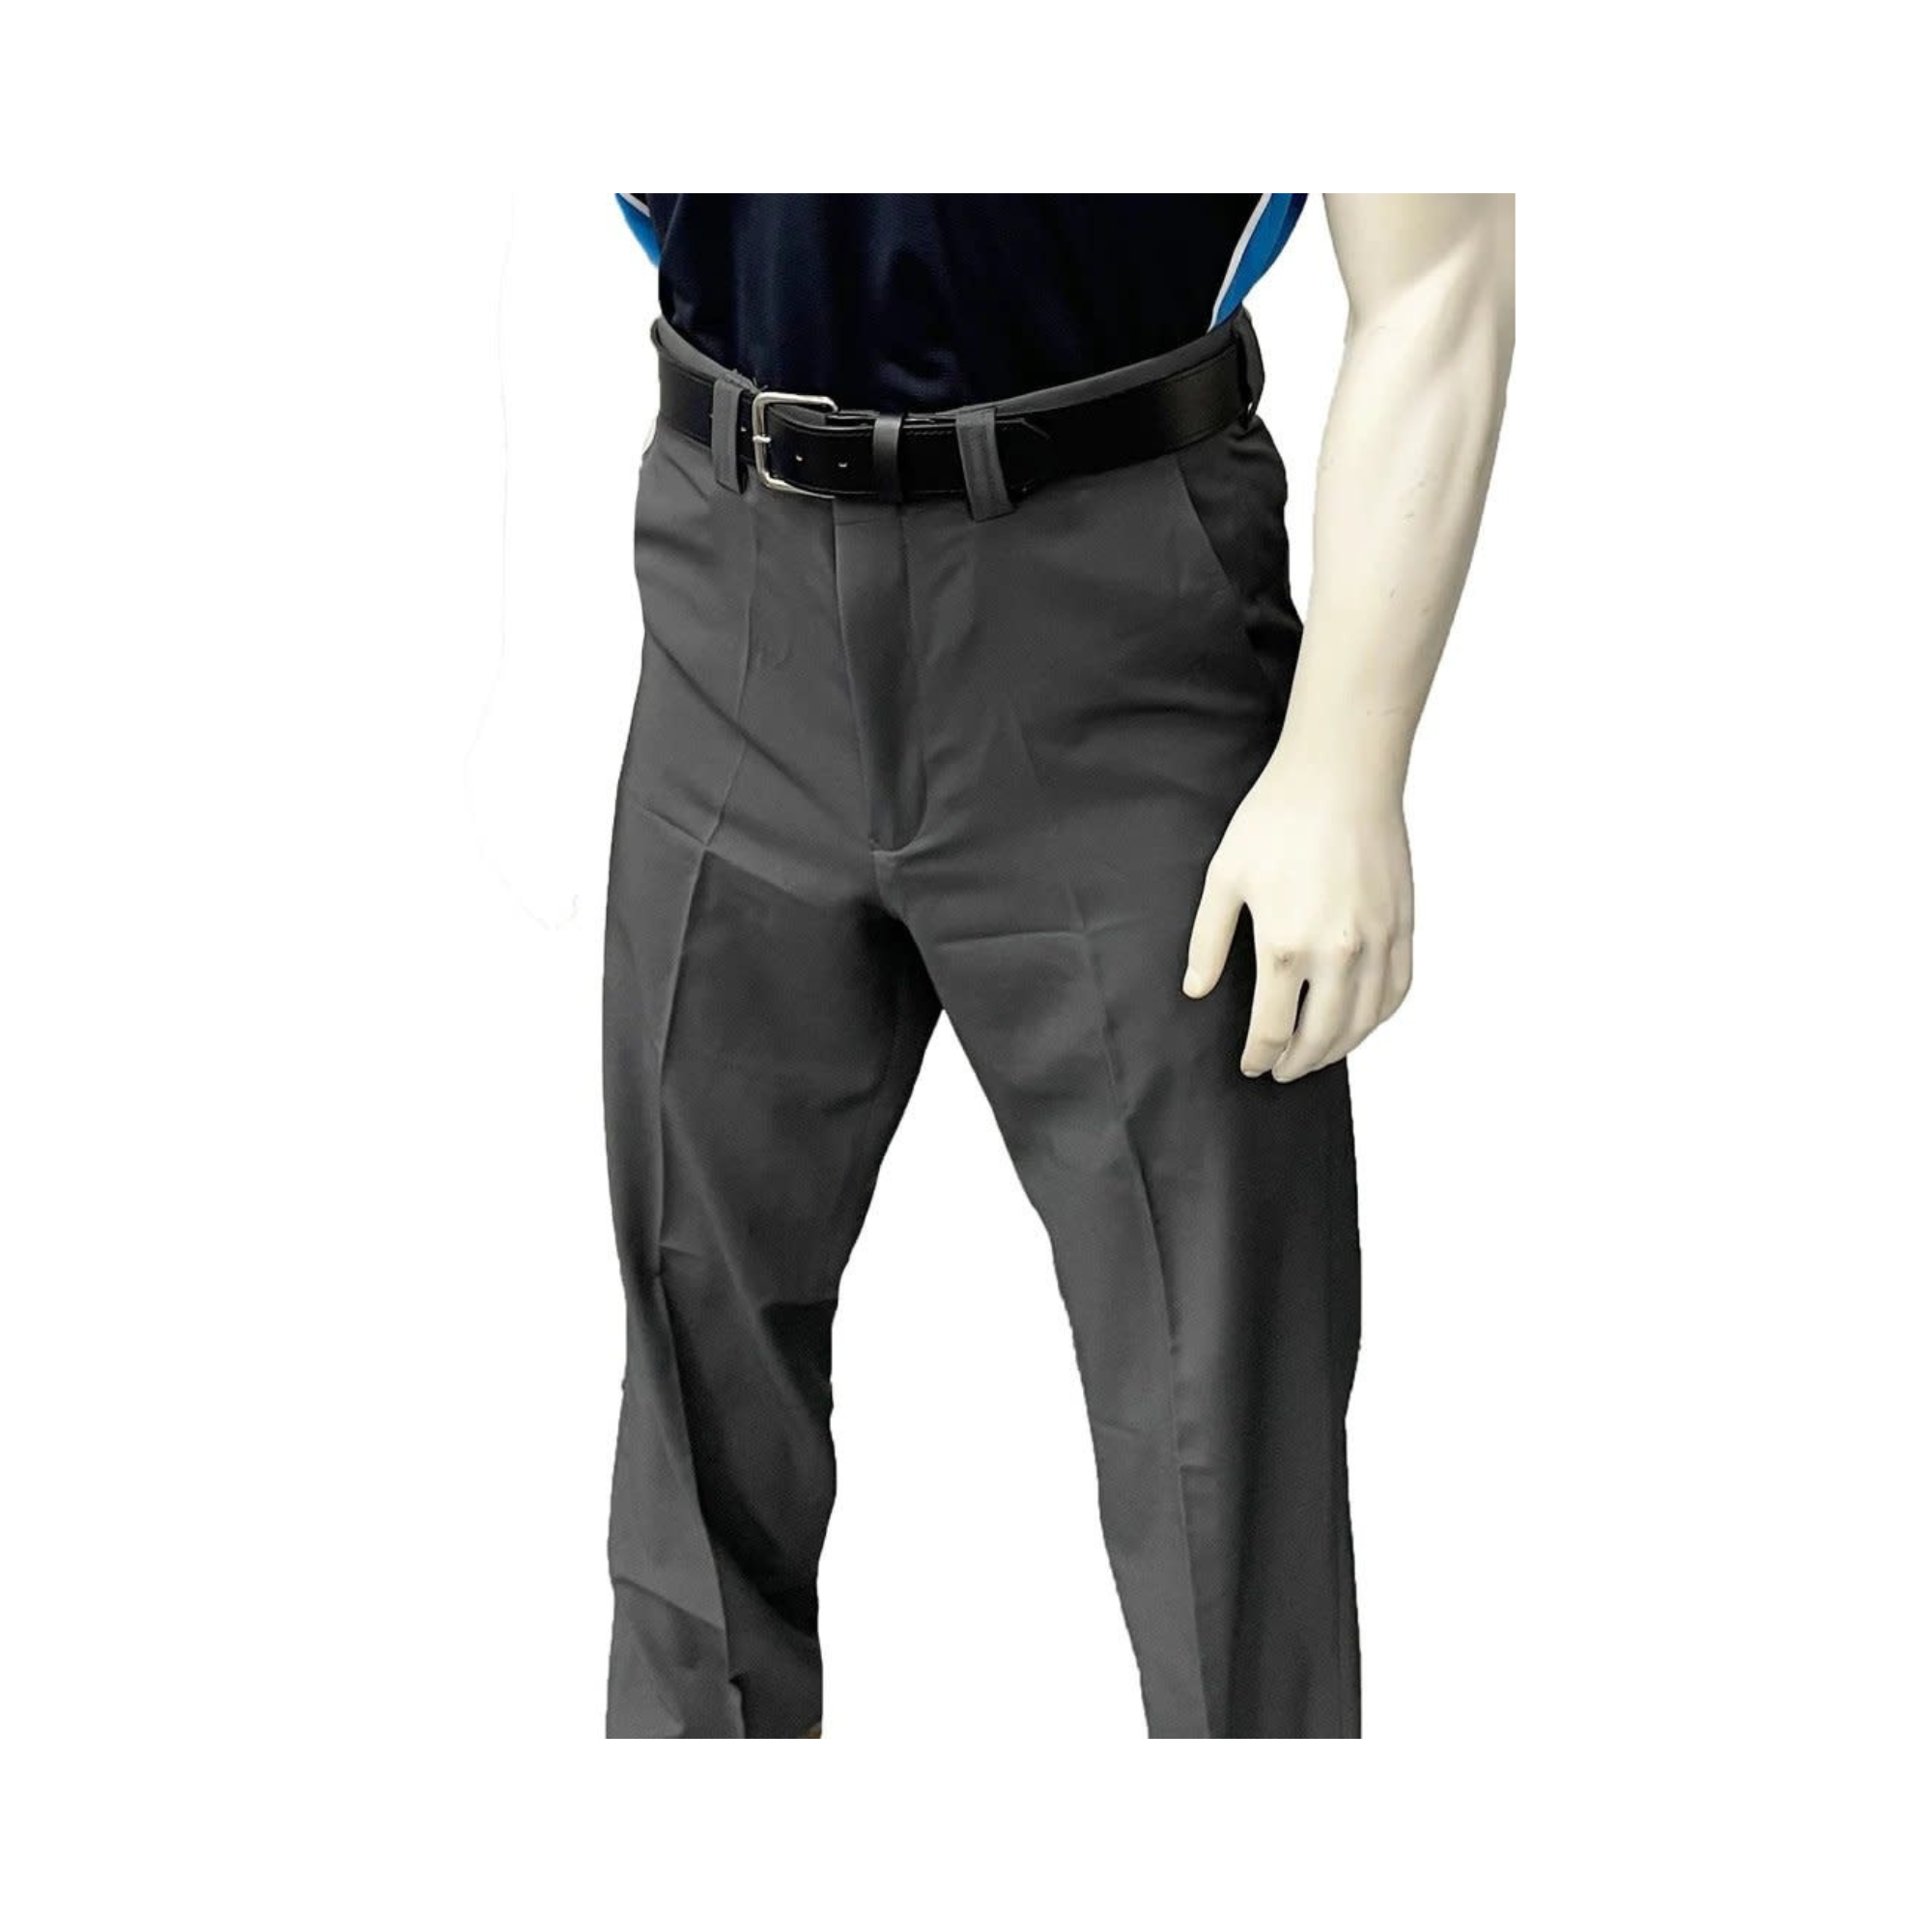 Smitty Mens 4-Way Stretch Flat Front Combo Pant Charcoal